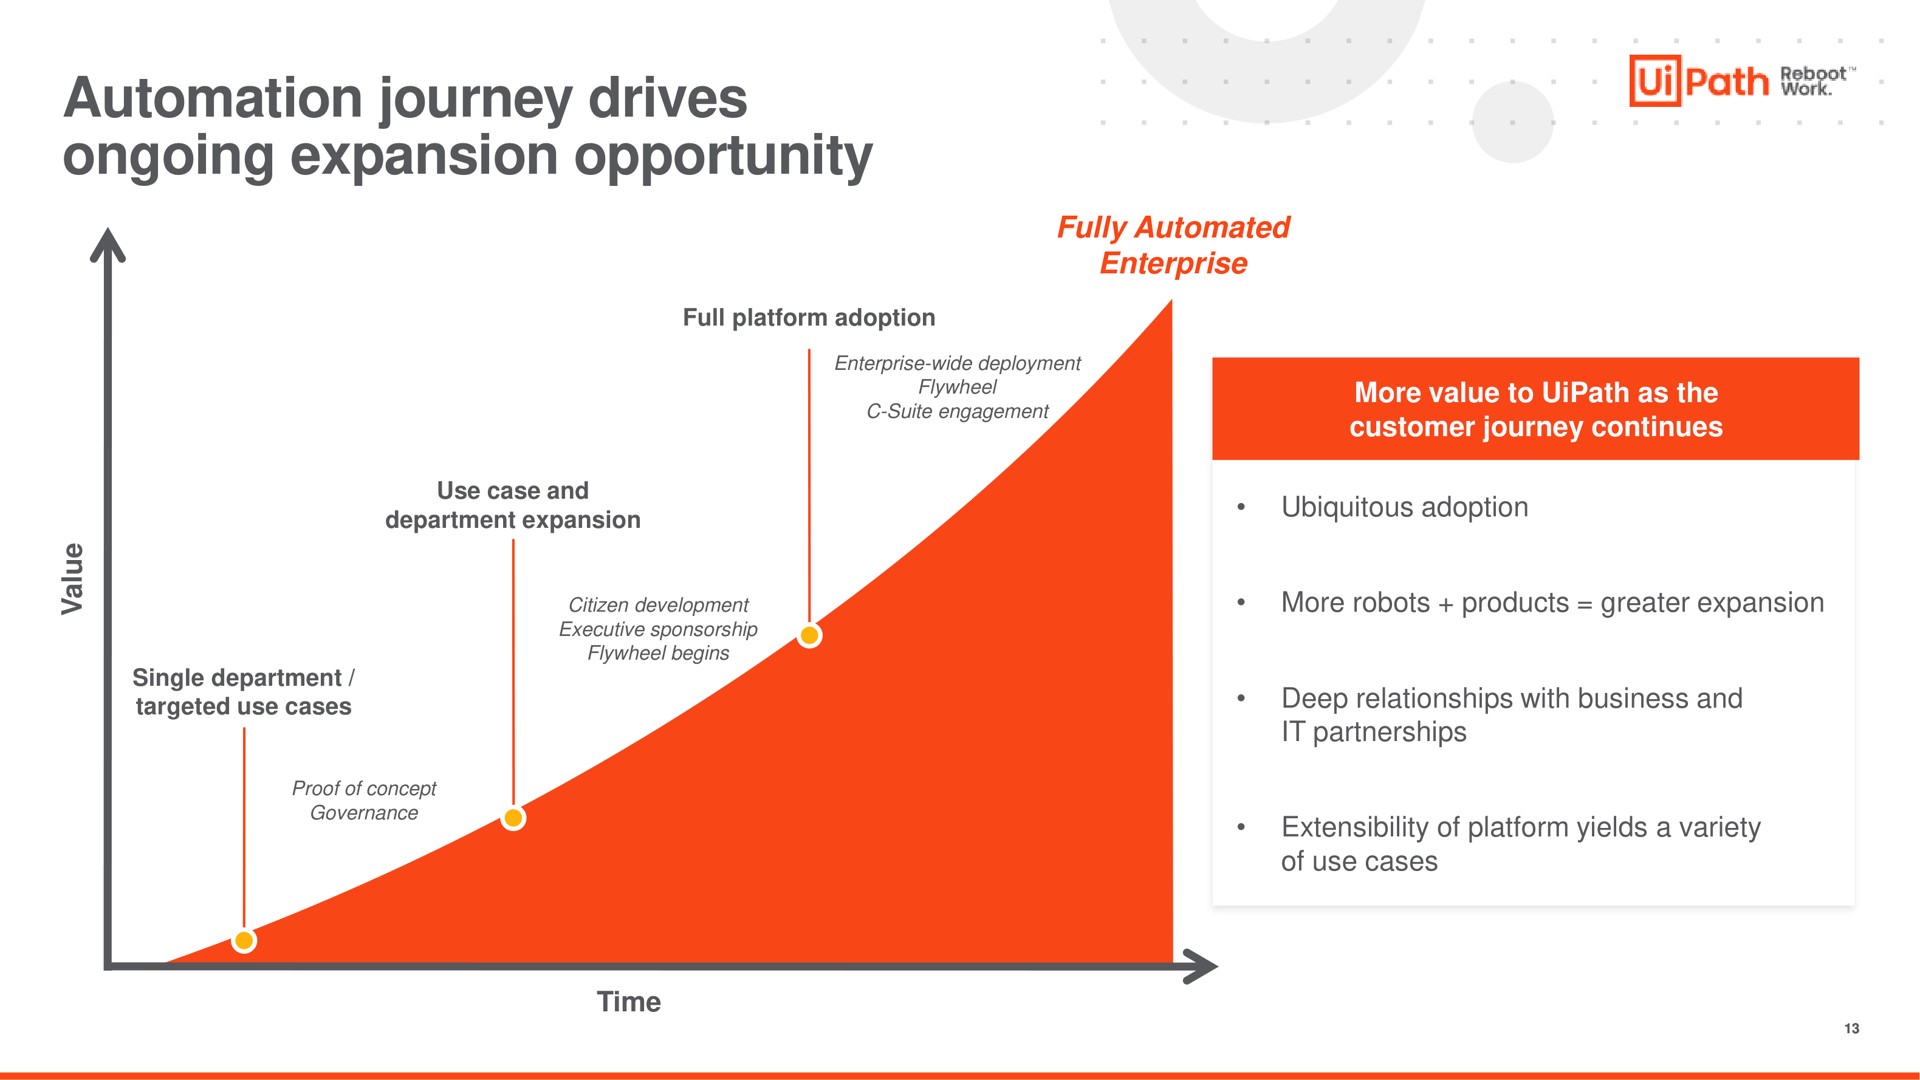 journey drives ongoing expansion opportunity path see | UiPath